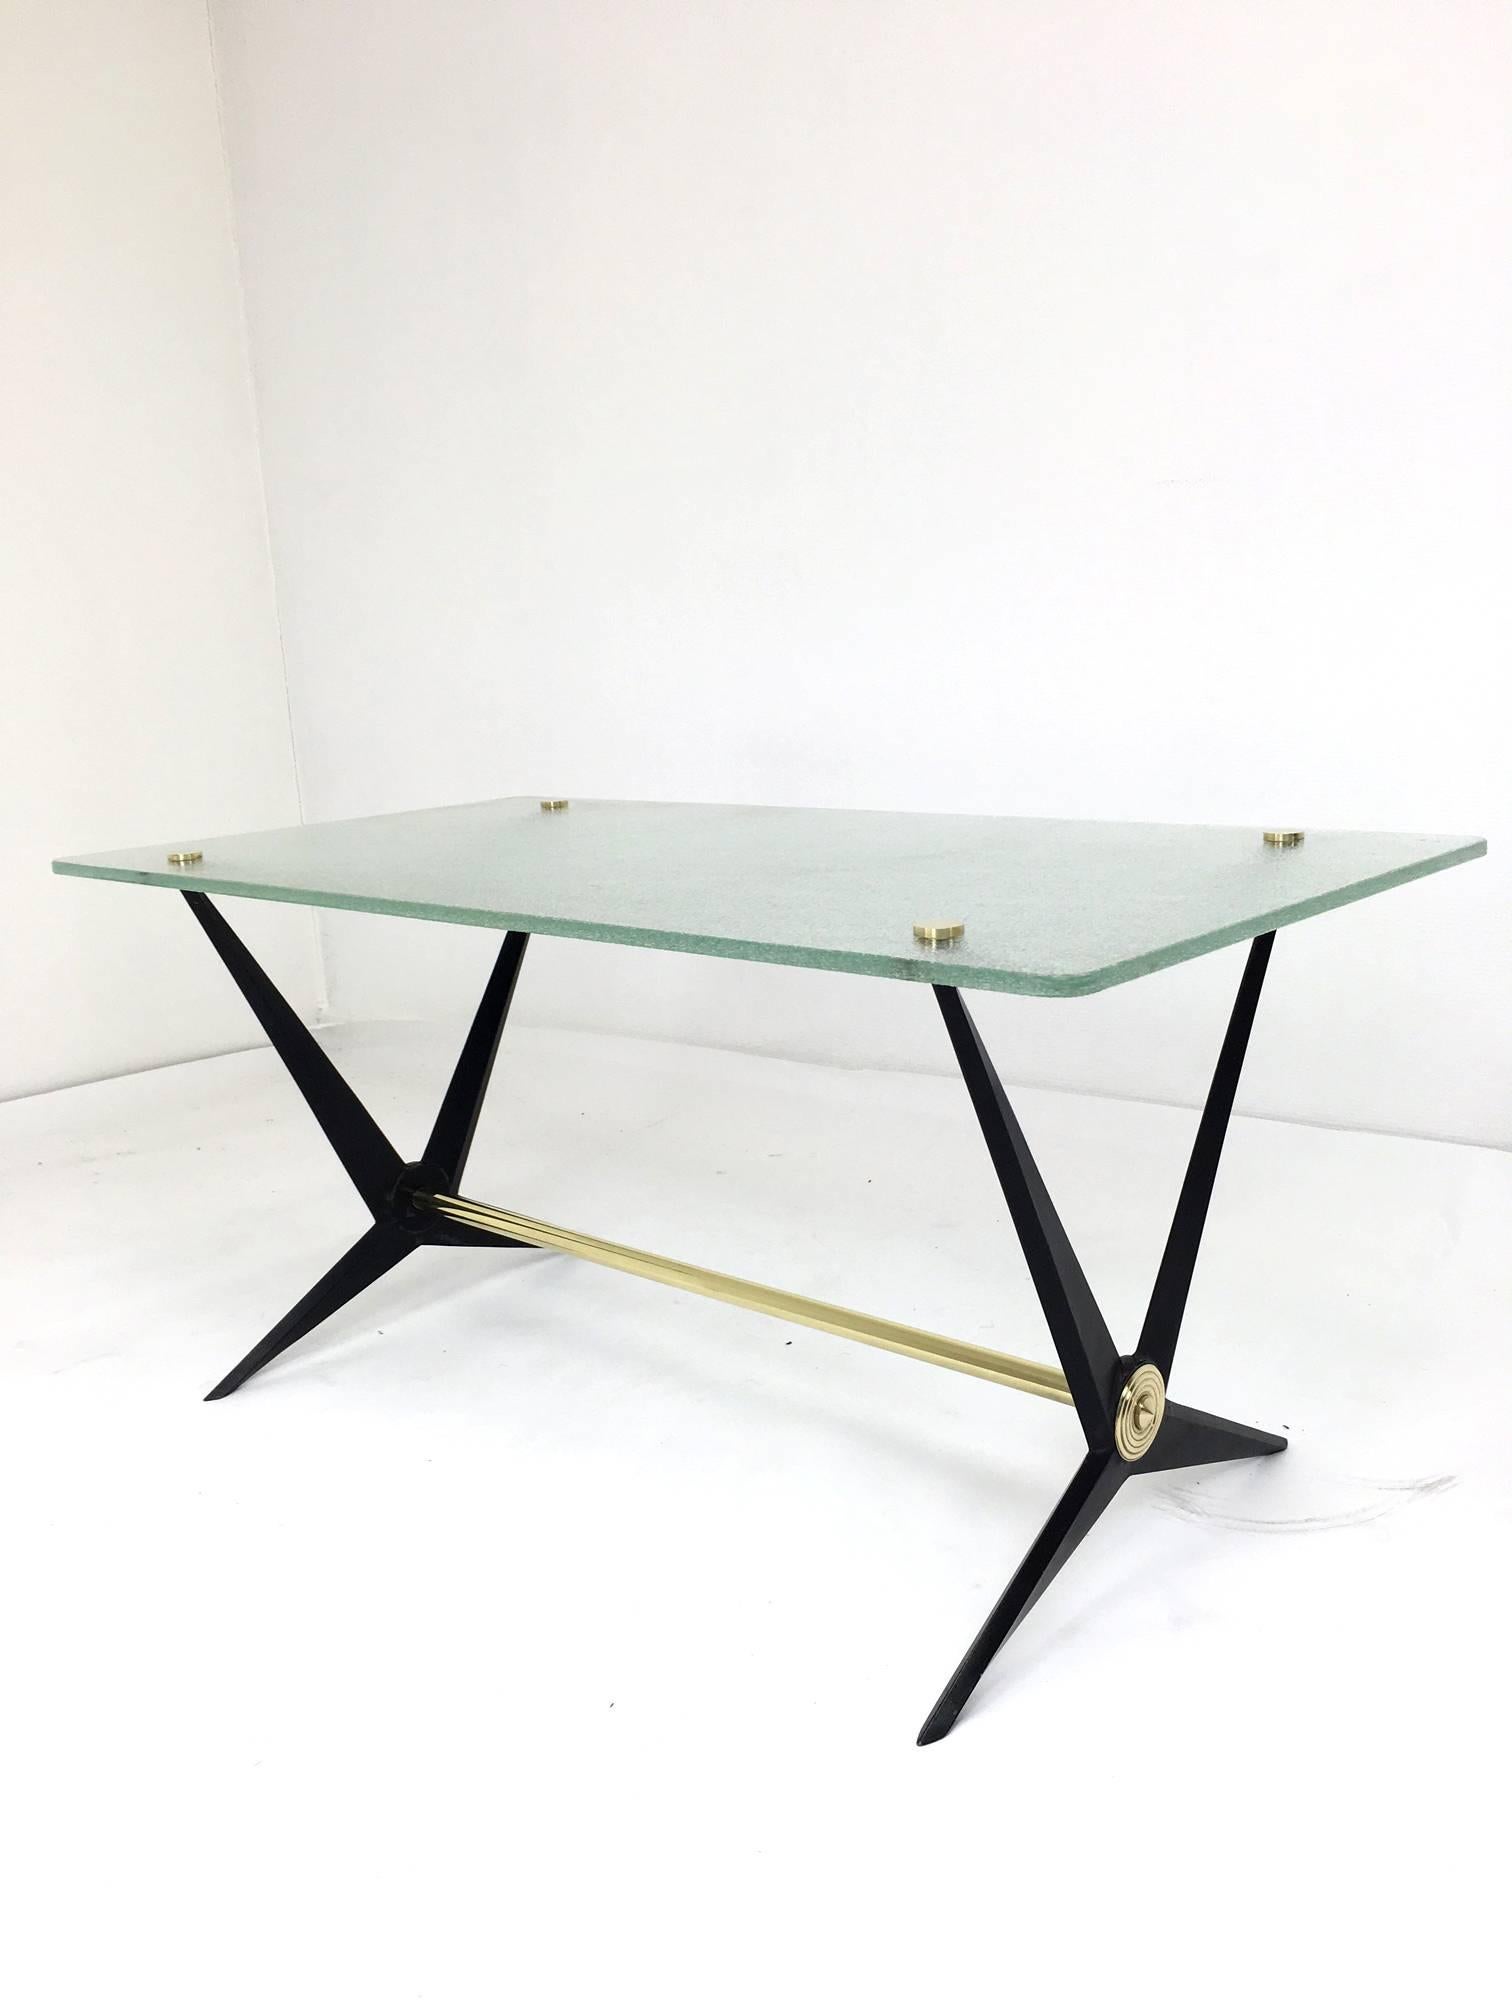 This back cast iron and brass side table was designed by Angelo Ostuni. It has a tempered glass top with slightly rounded corners and four brass circular fittings to secure the glass to the base. There is brass decorative detailing on the